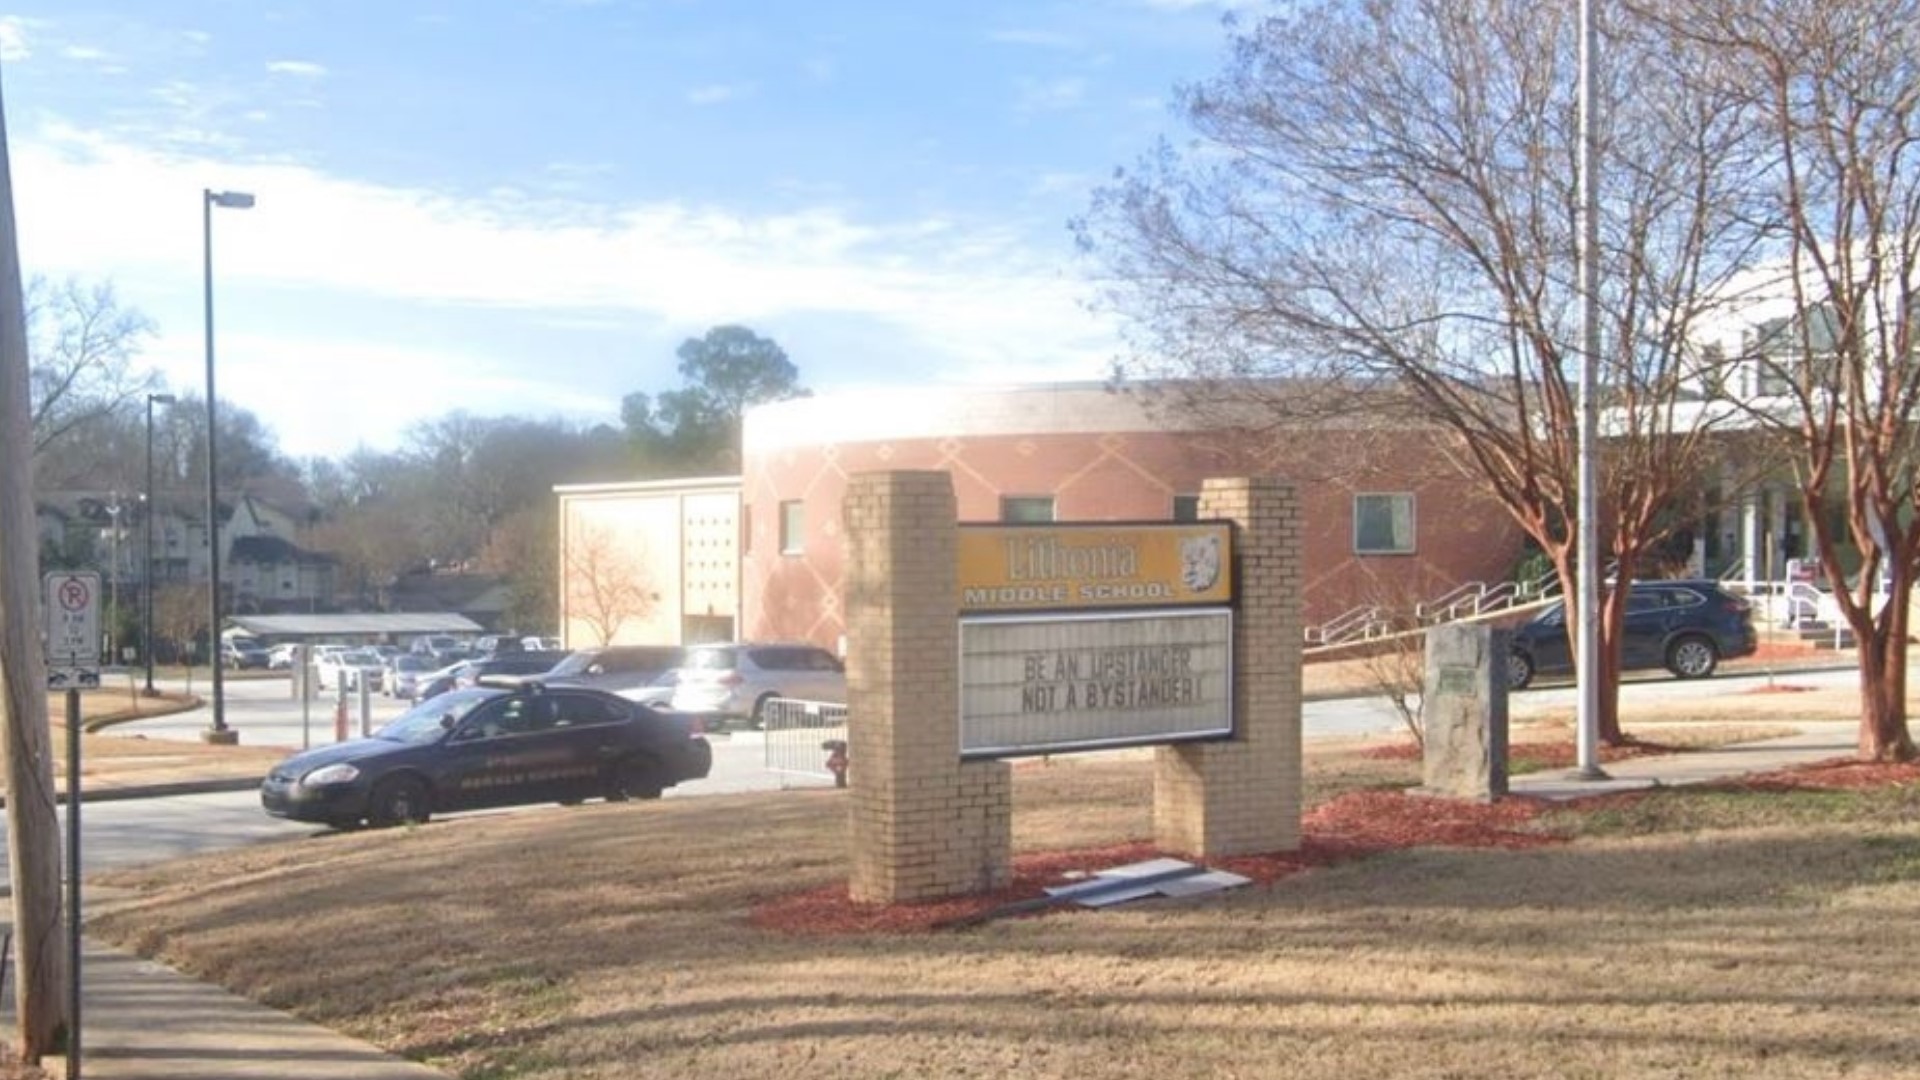 No students were involved in the allegations, the school district said.